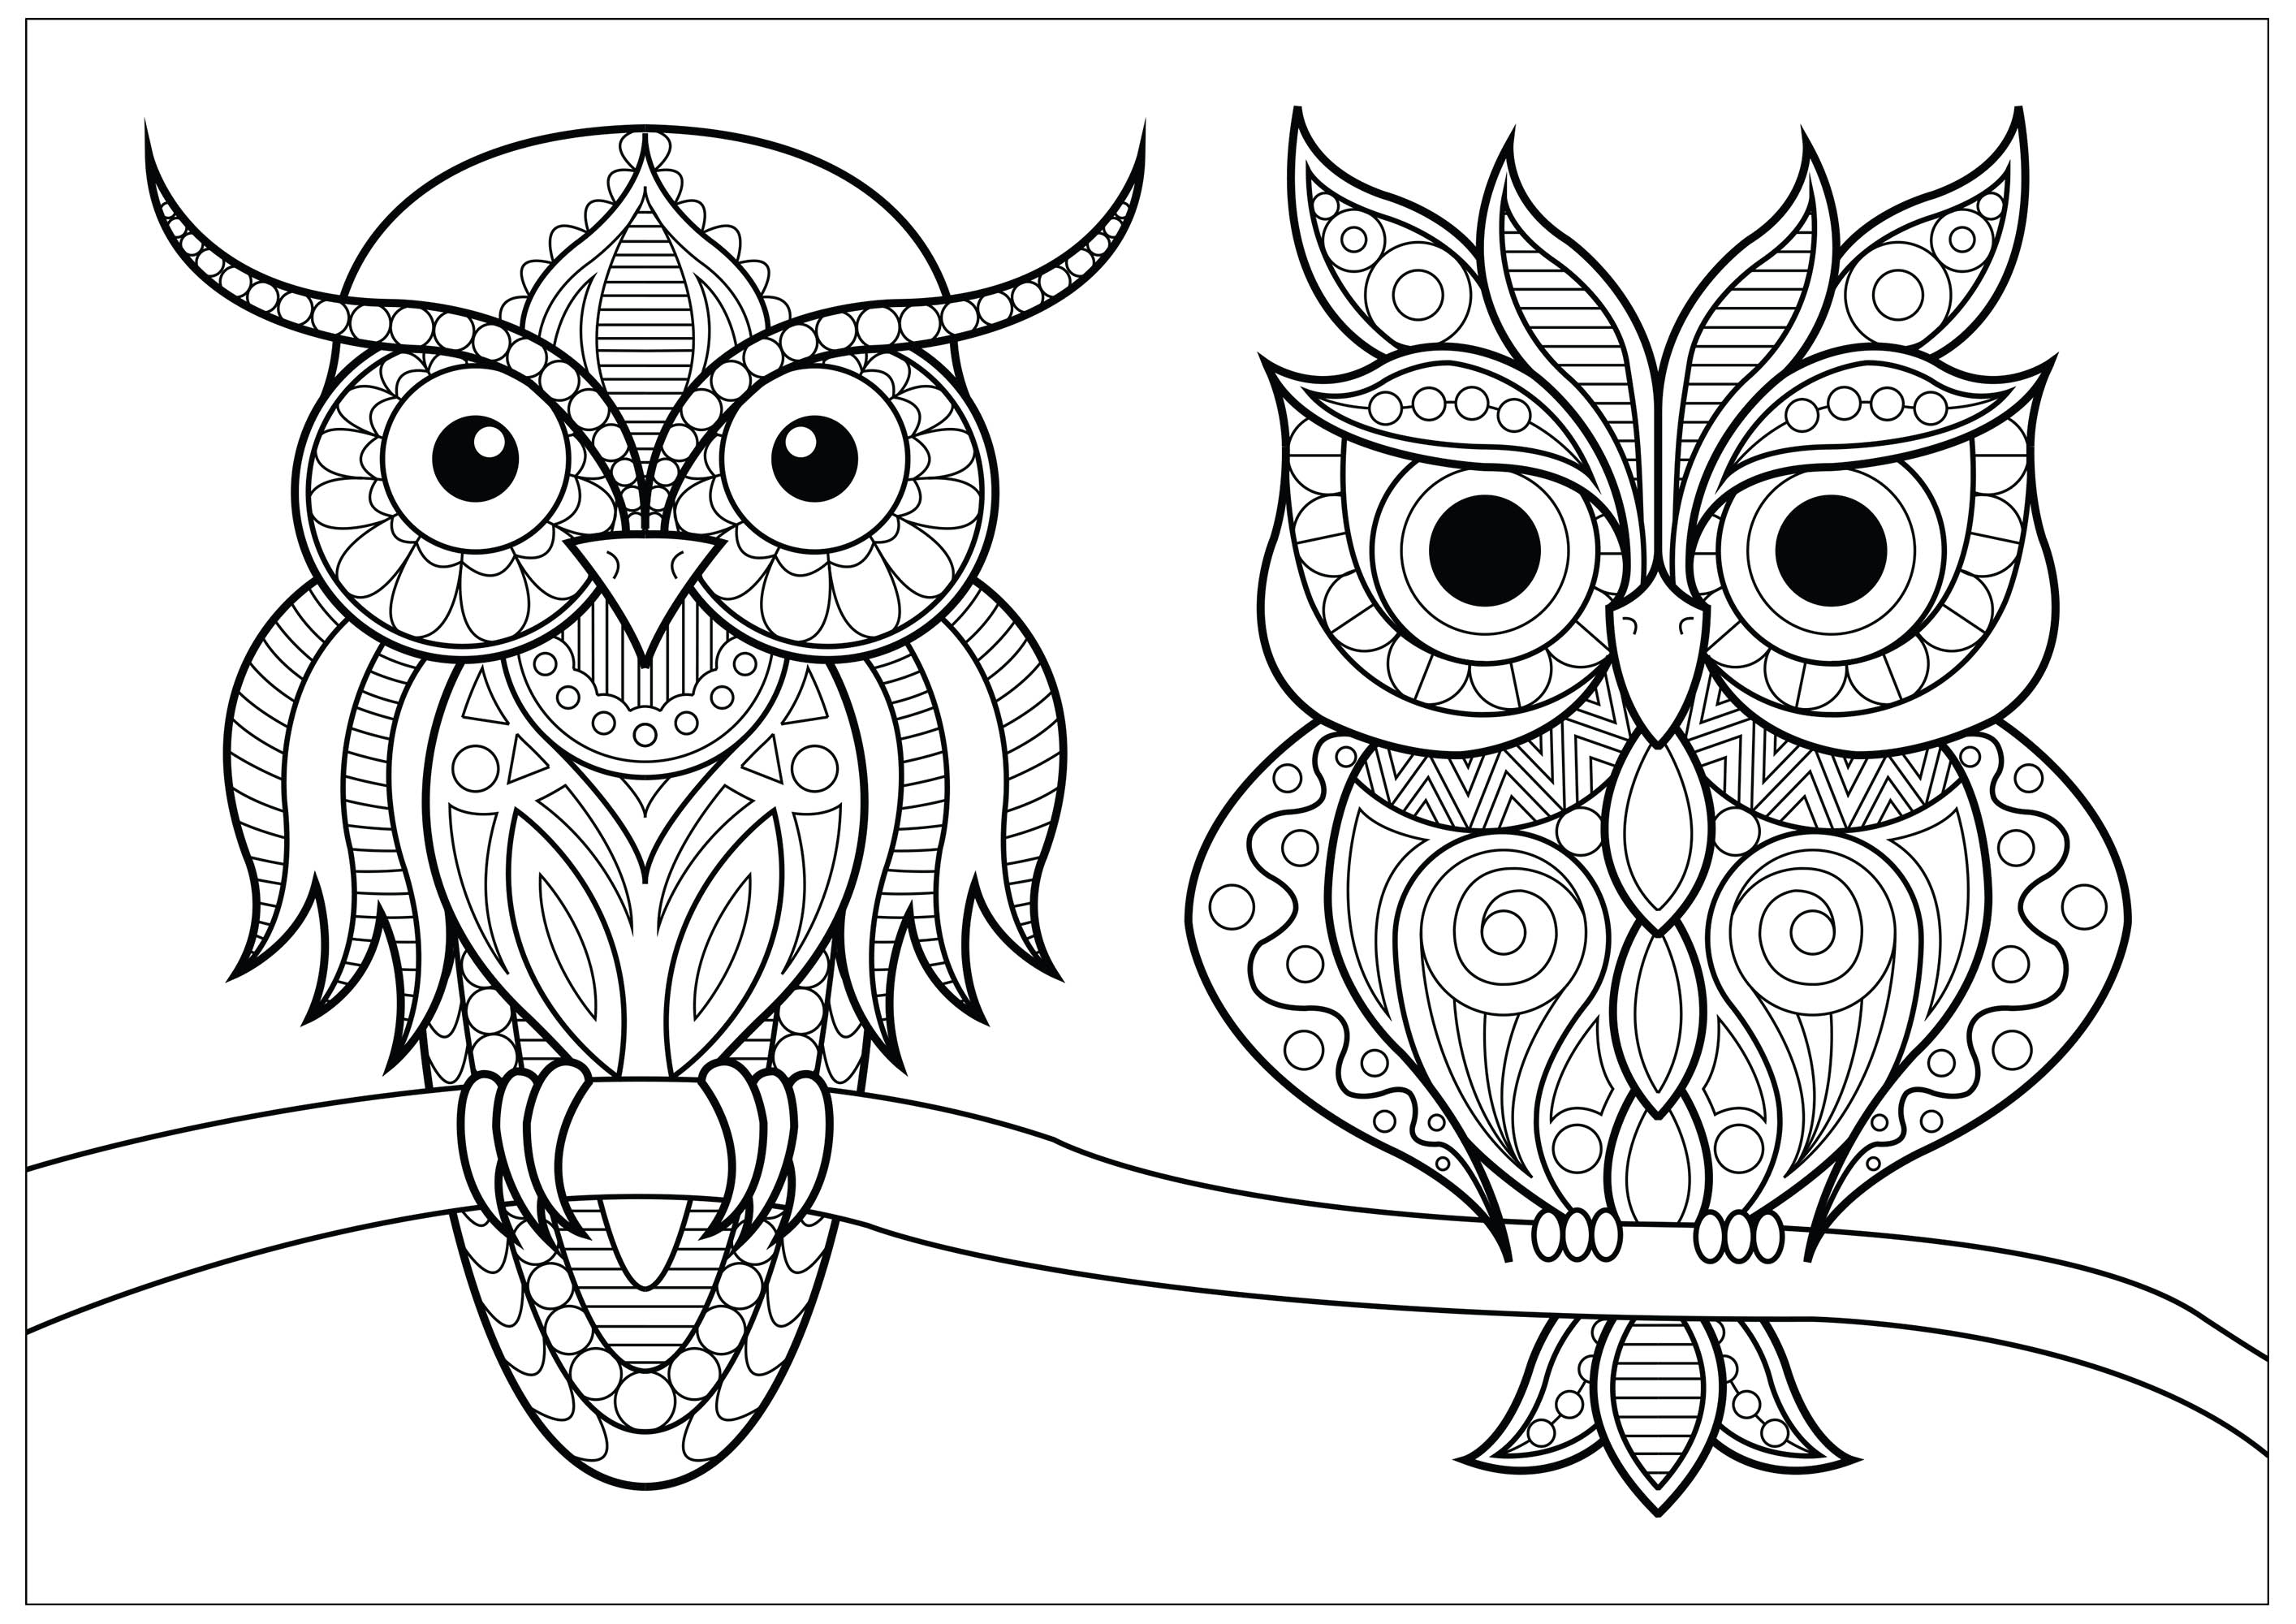 Download Two owls with simple patterns on branch - Owls Adult Coloring Pages